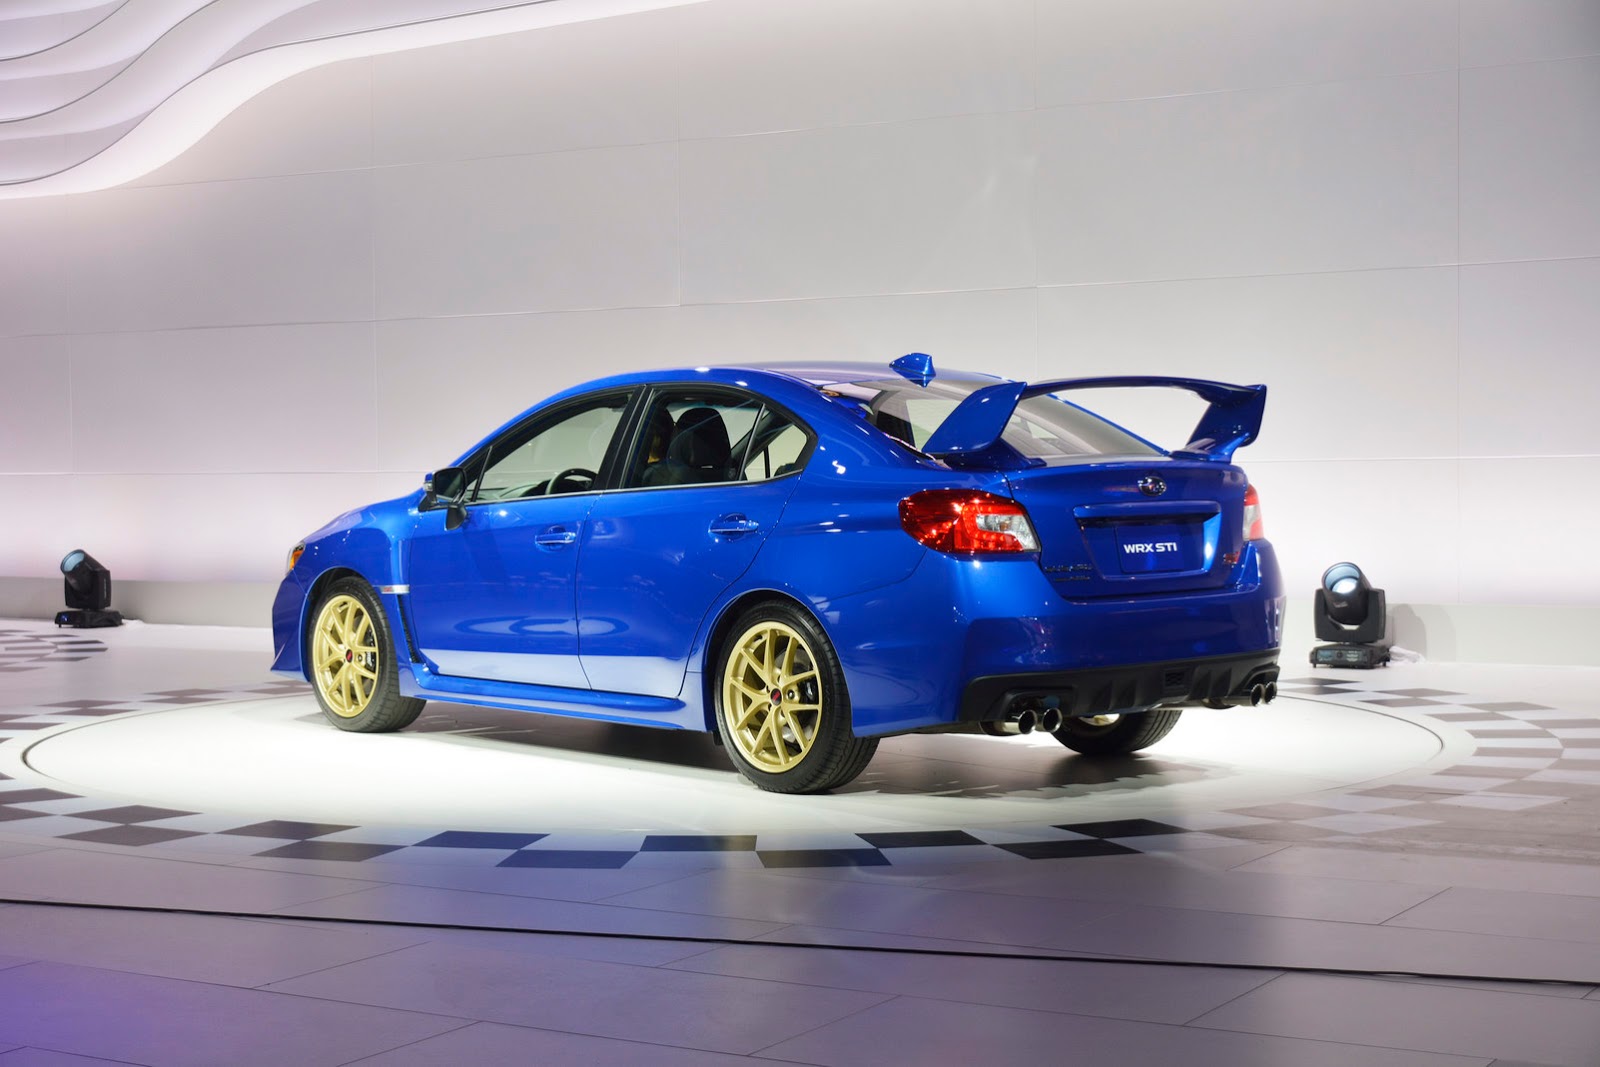 2015 Subaru WRX STI Bows in Detroit with a Big Wing and